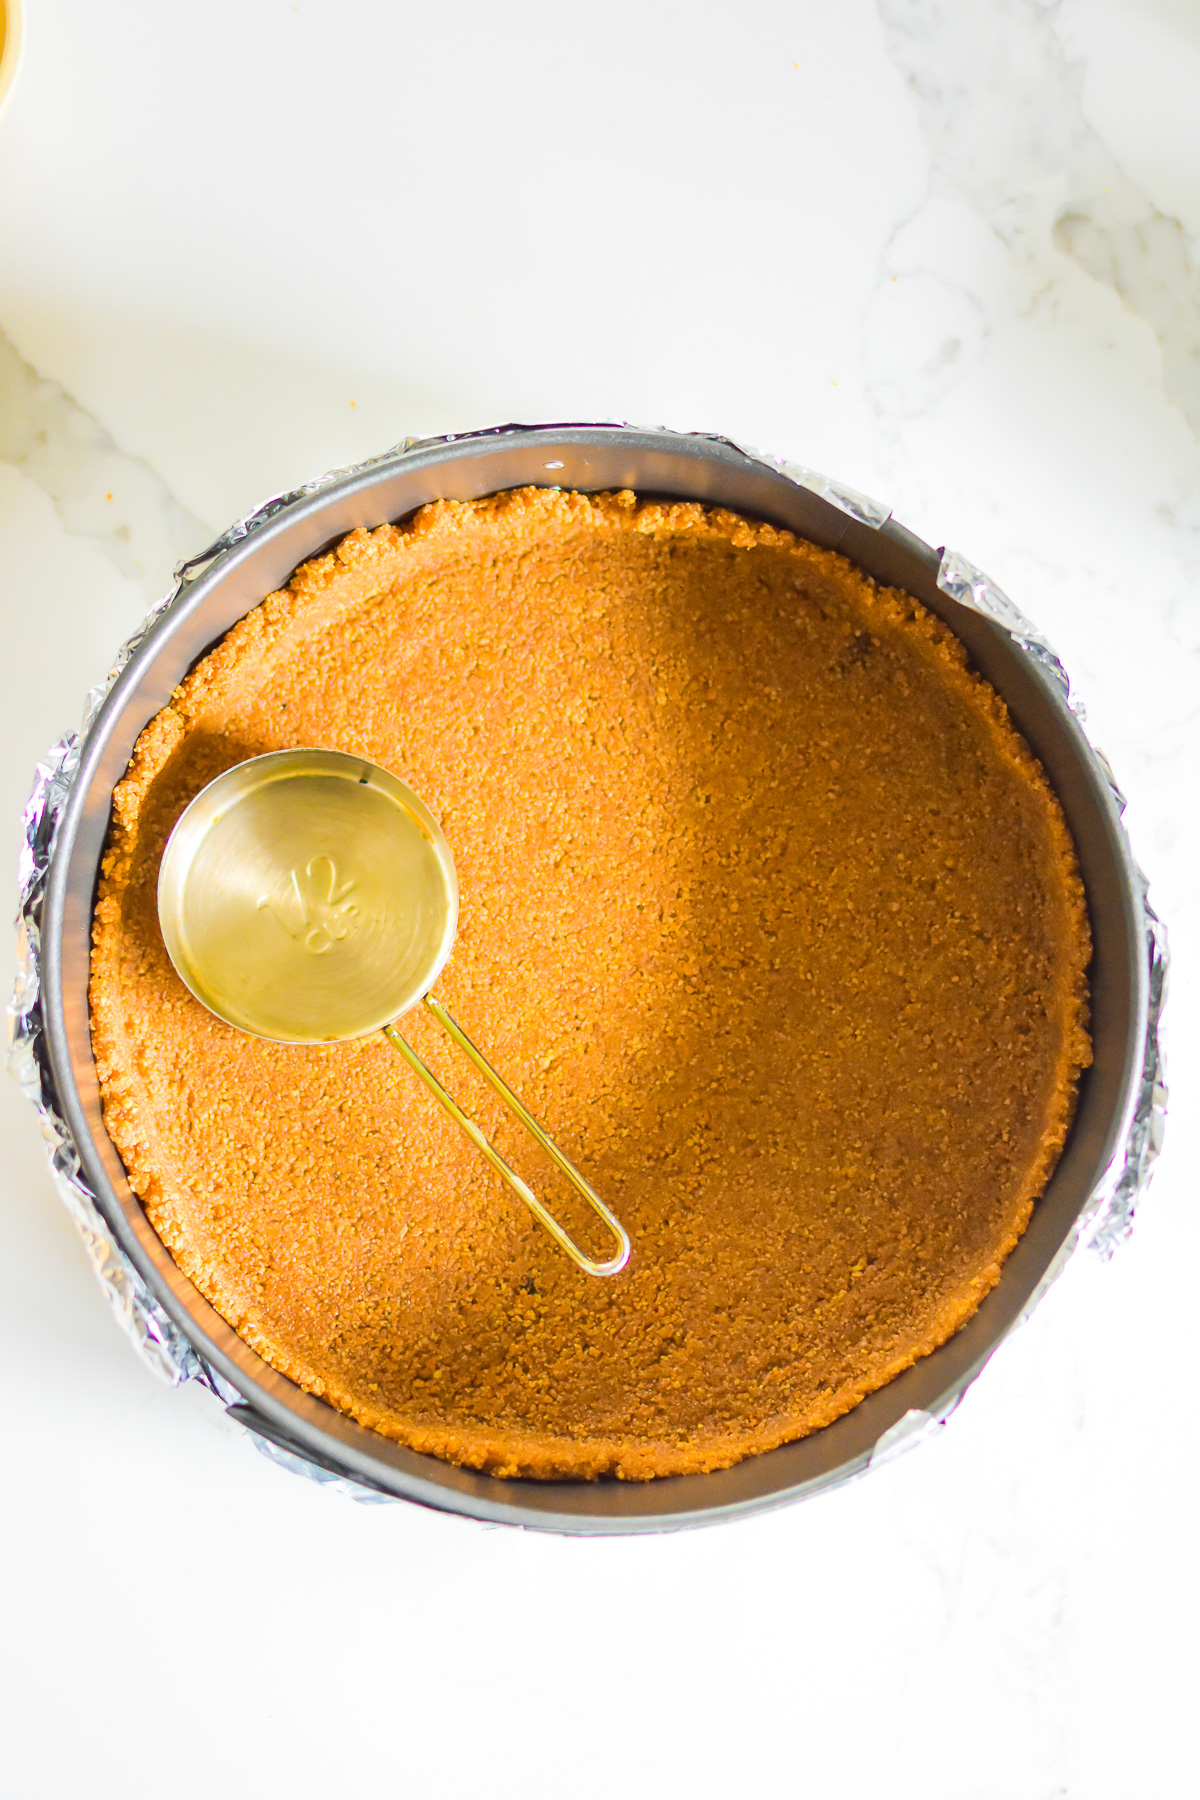 scratch-made graham cracker crust pressed into springform pan with a measuring cup.